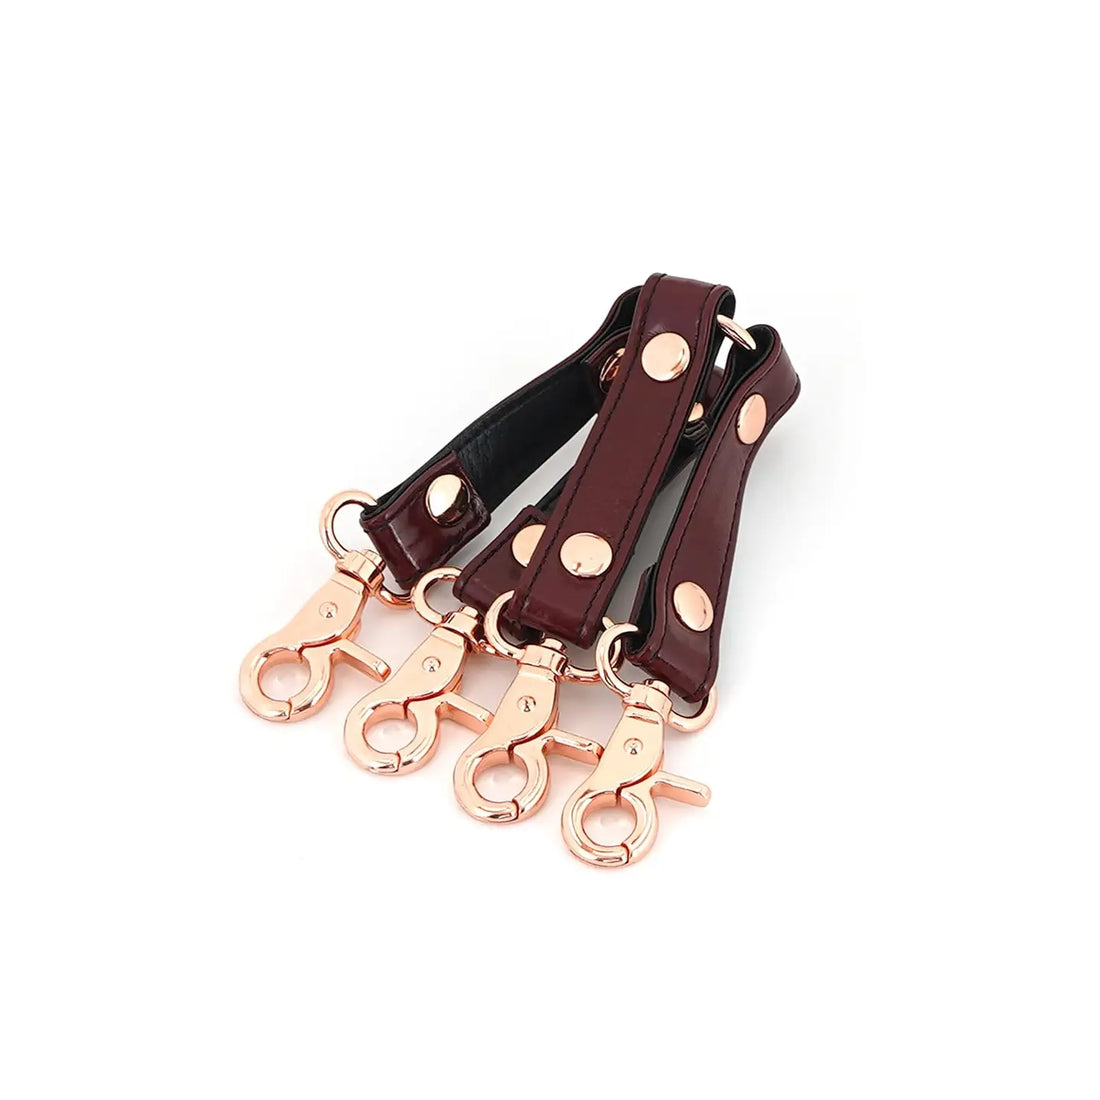 ANON SECRETS - WINE RED LEATHER HOGTIE WITH CLIPS